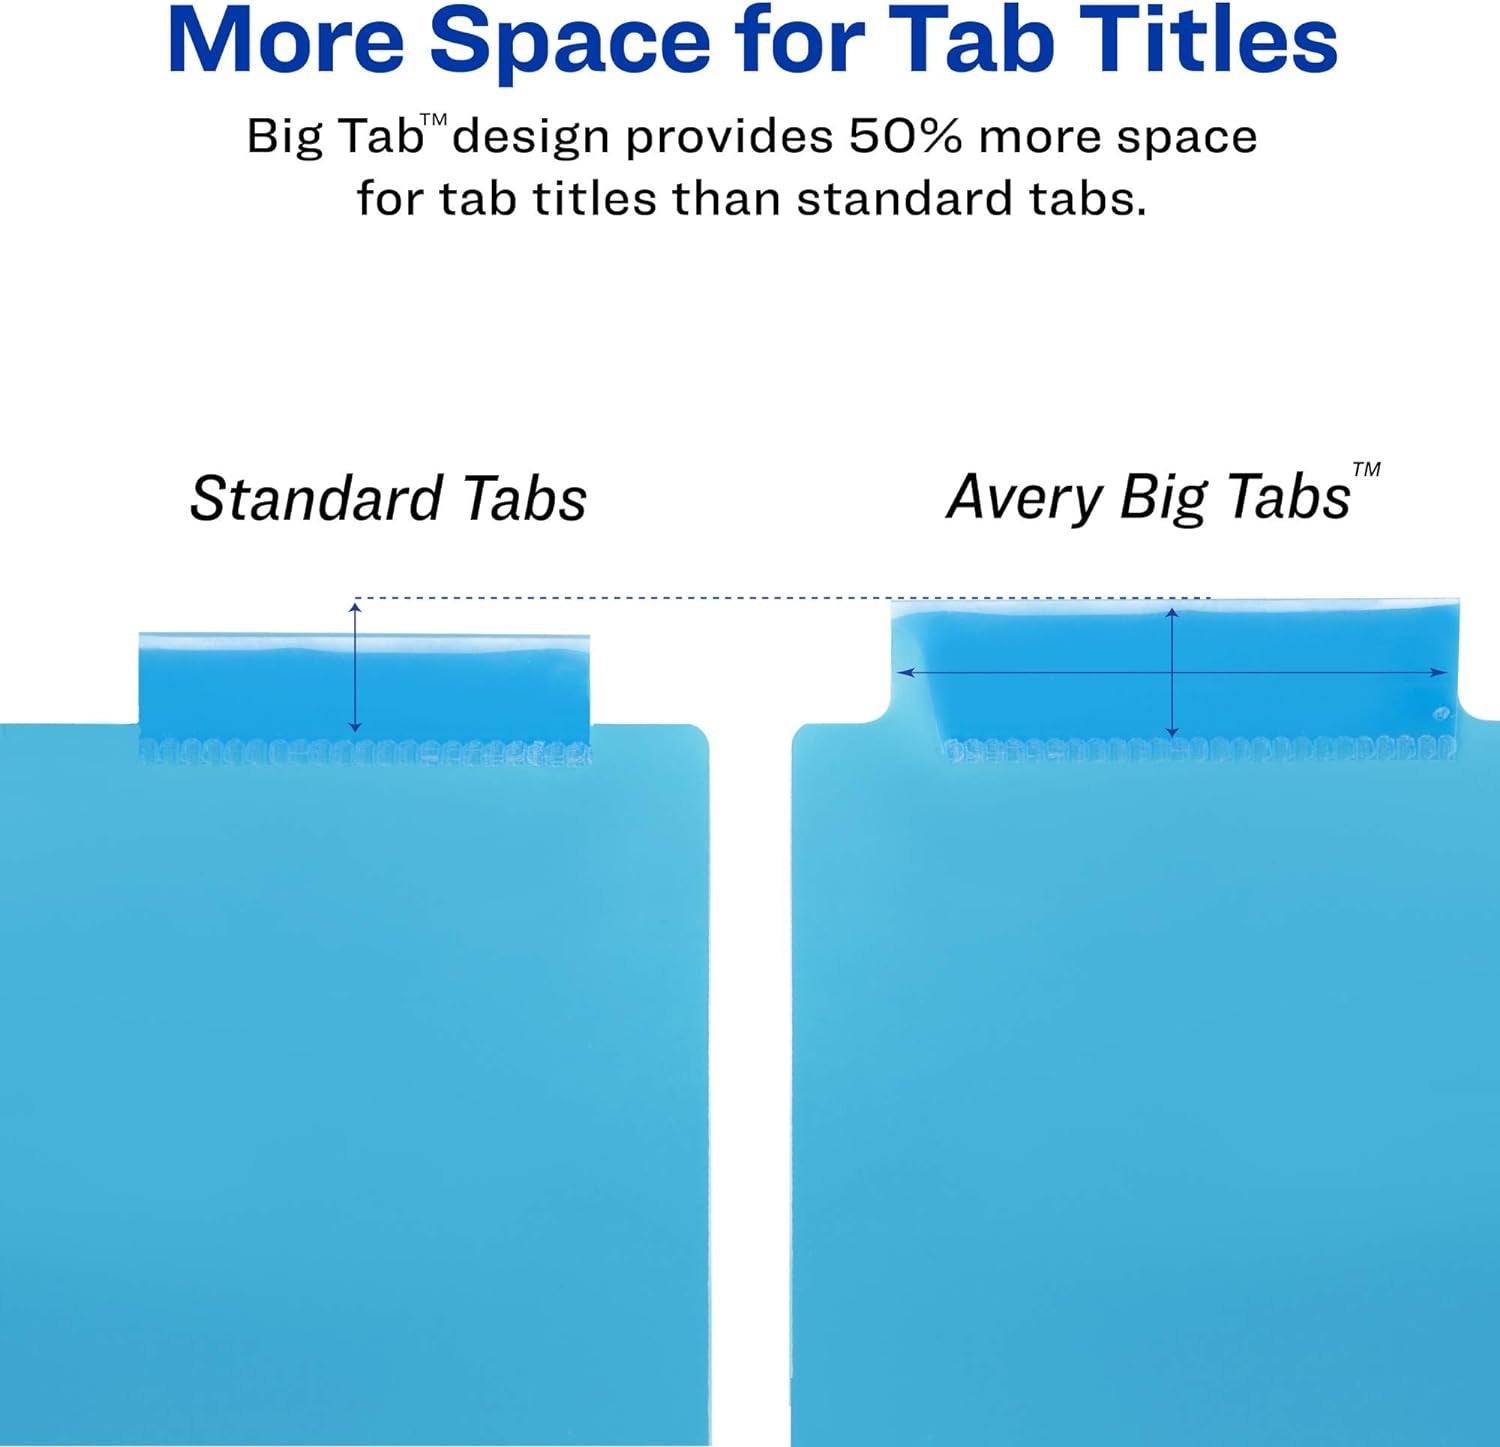 Big Tab Insertable Plastic 2 Pocket Dividers for 3 Ring Binders, 8 Tab Set, Bright Two-Tone Multicolor, Works with Sheet Protectors, 1 Set (11989)